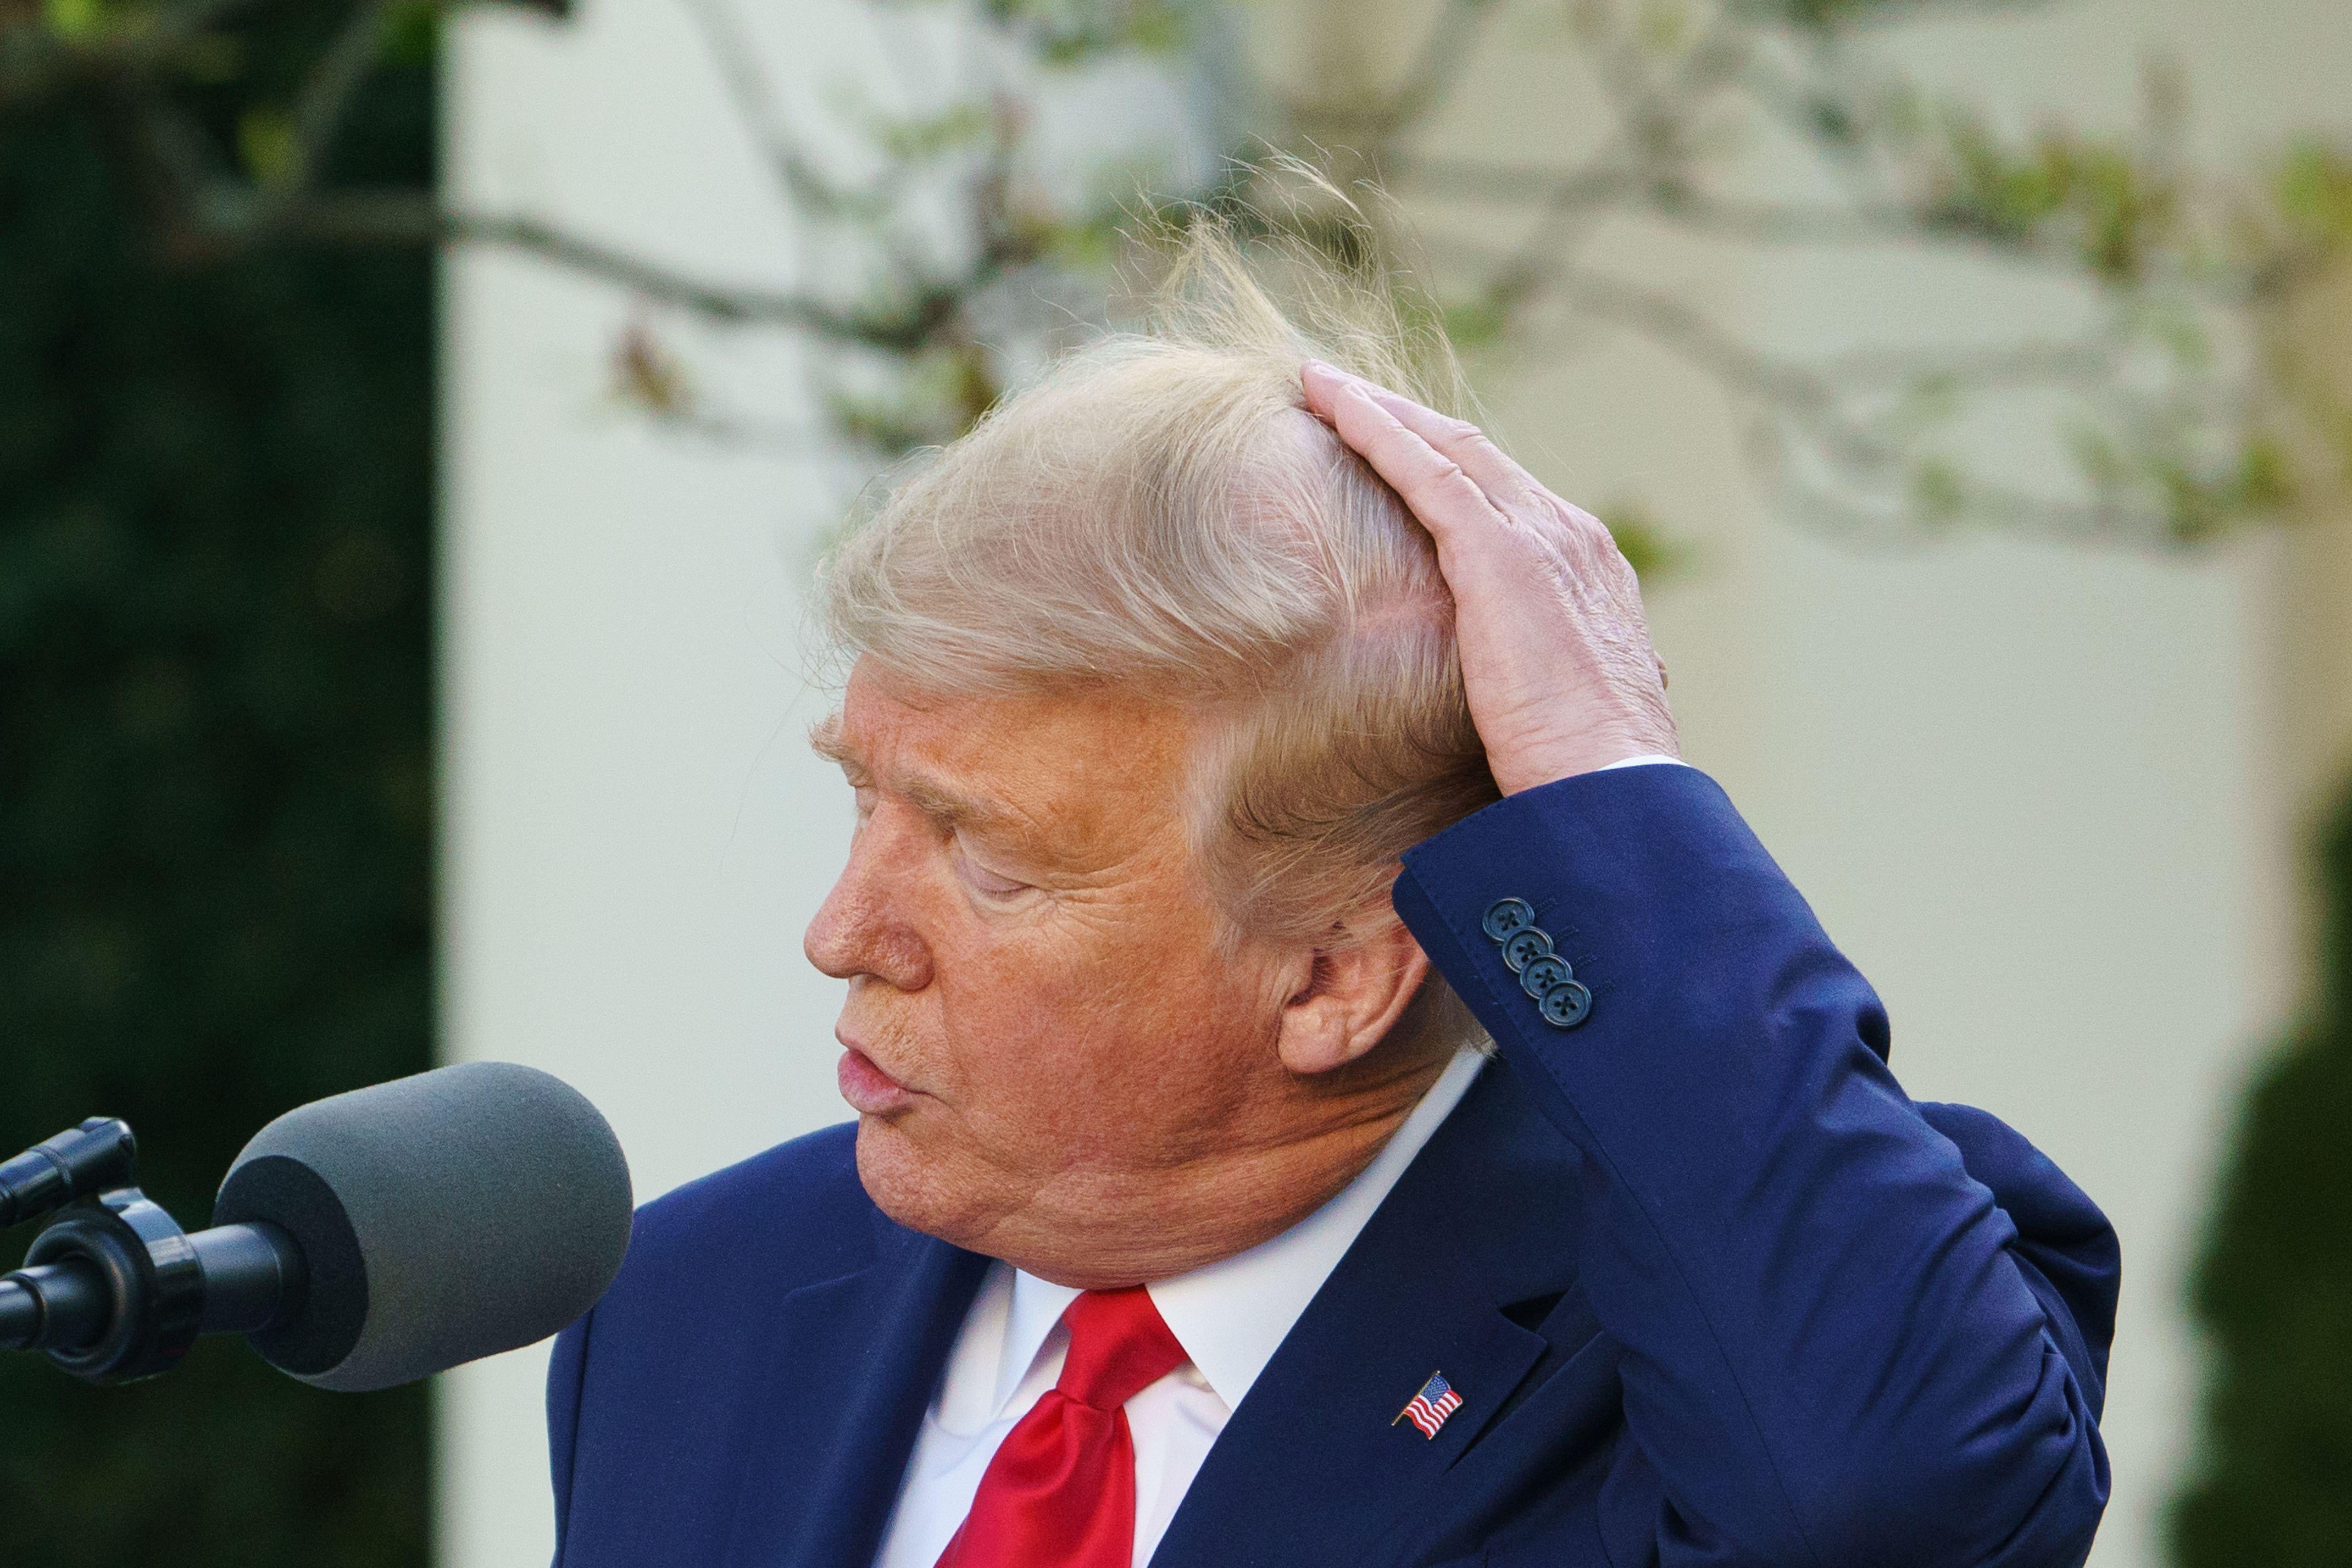 Trump pats down his hair while speaking into a microphone.